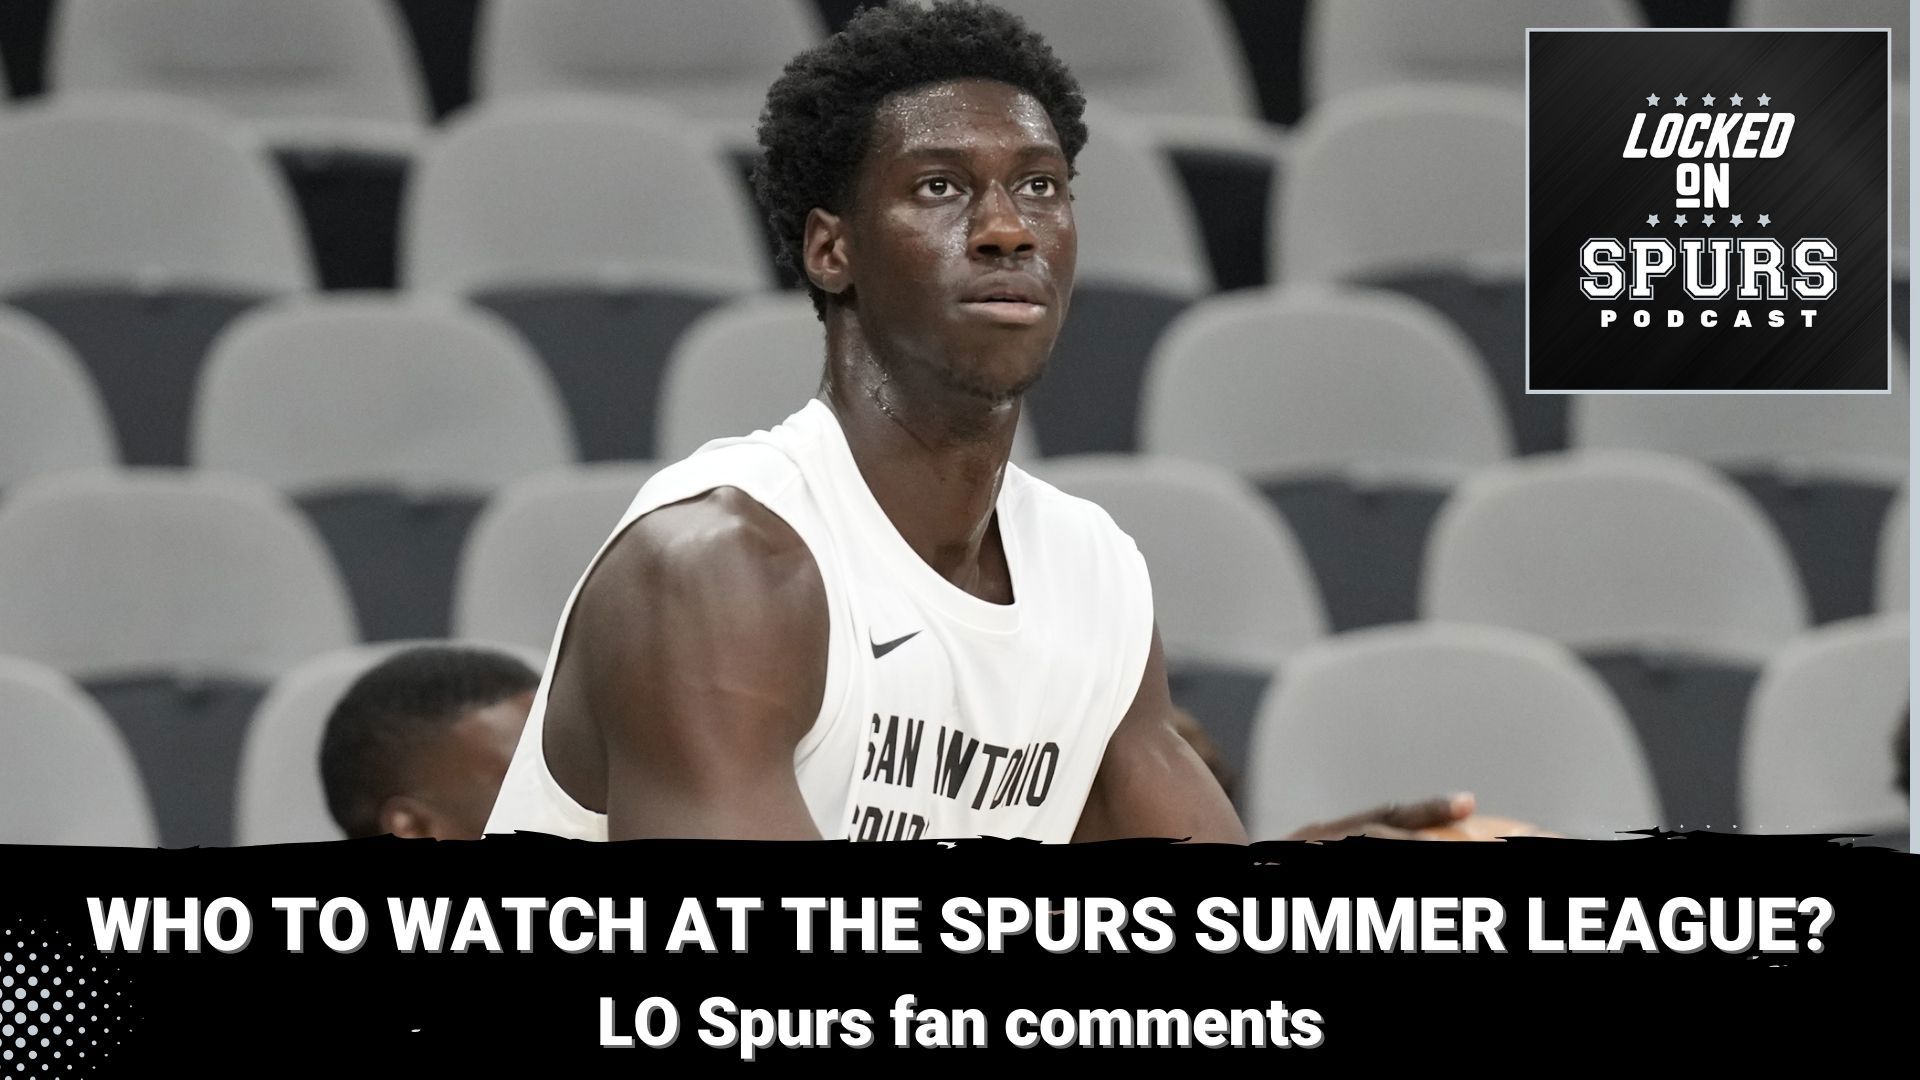 The Summer Spurs tip-off play at the California Classic.